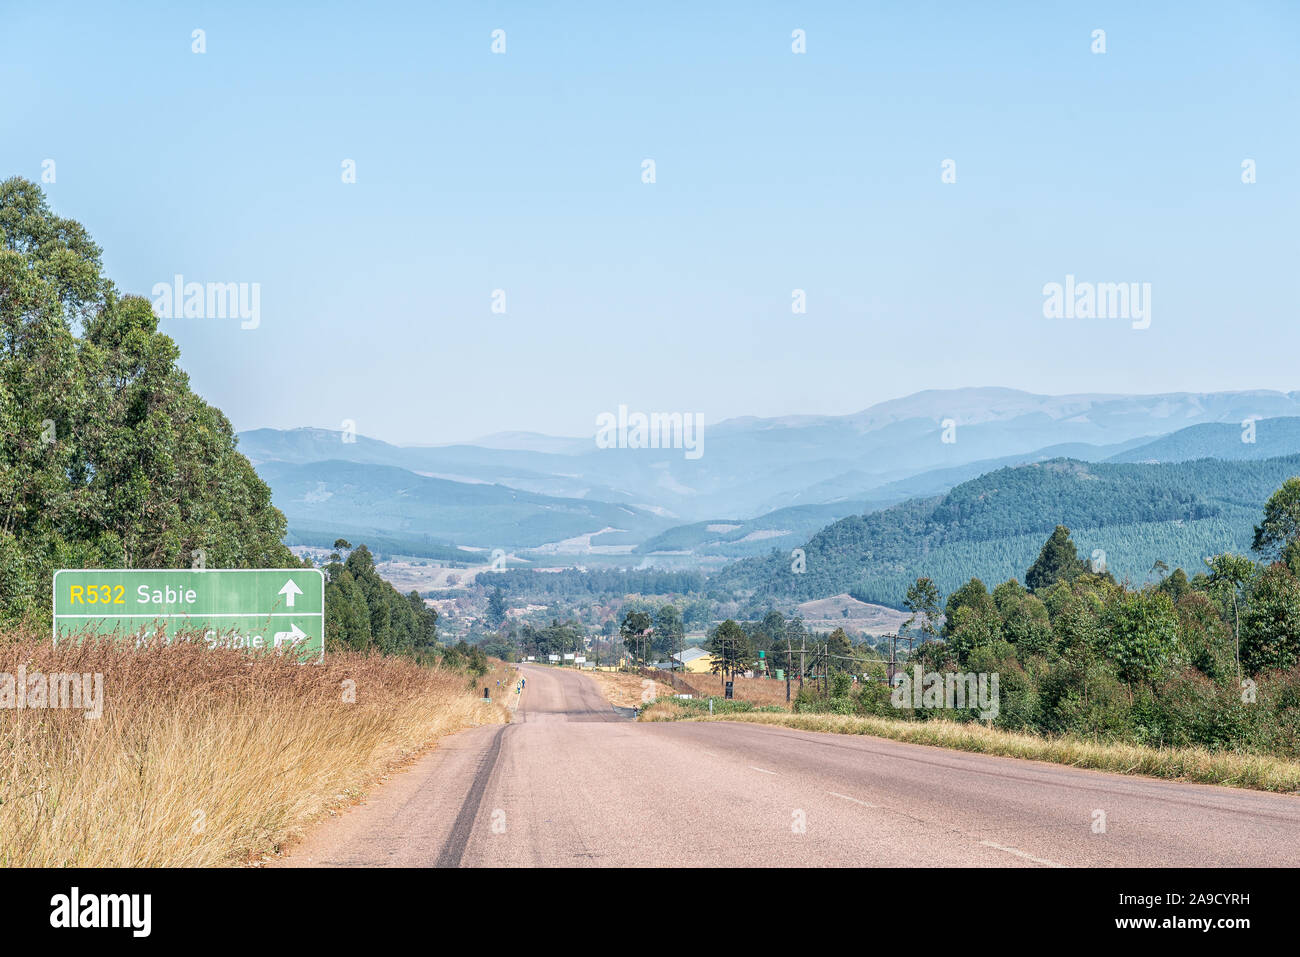 A view of the landscape on road R532 near Sabie. A directional sign is visible Stock Photo